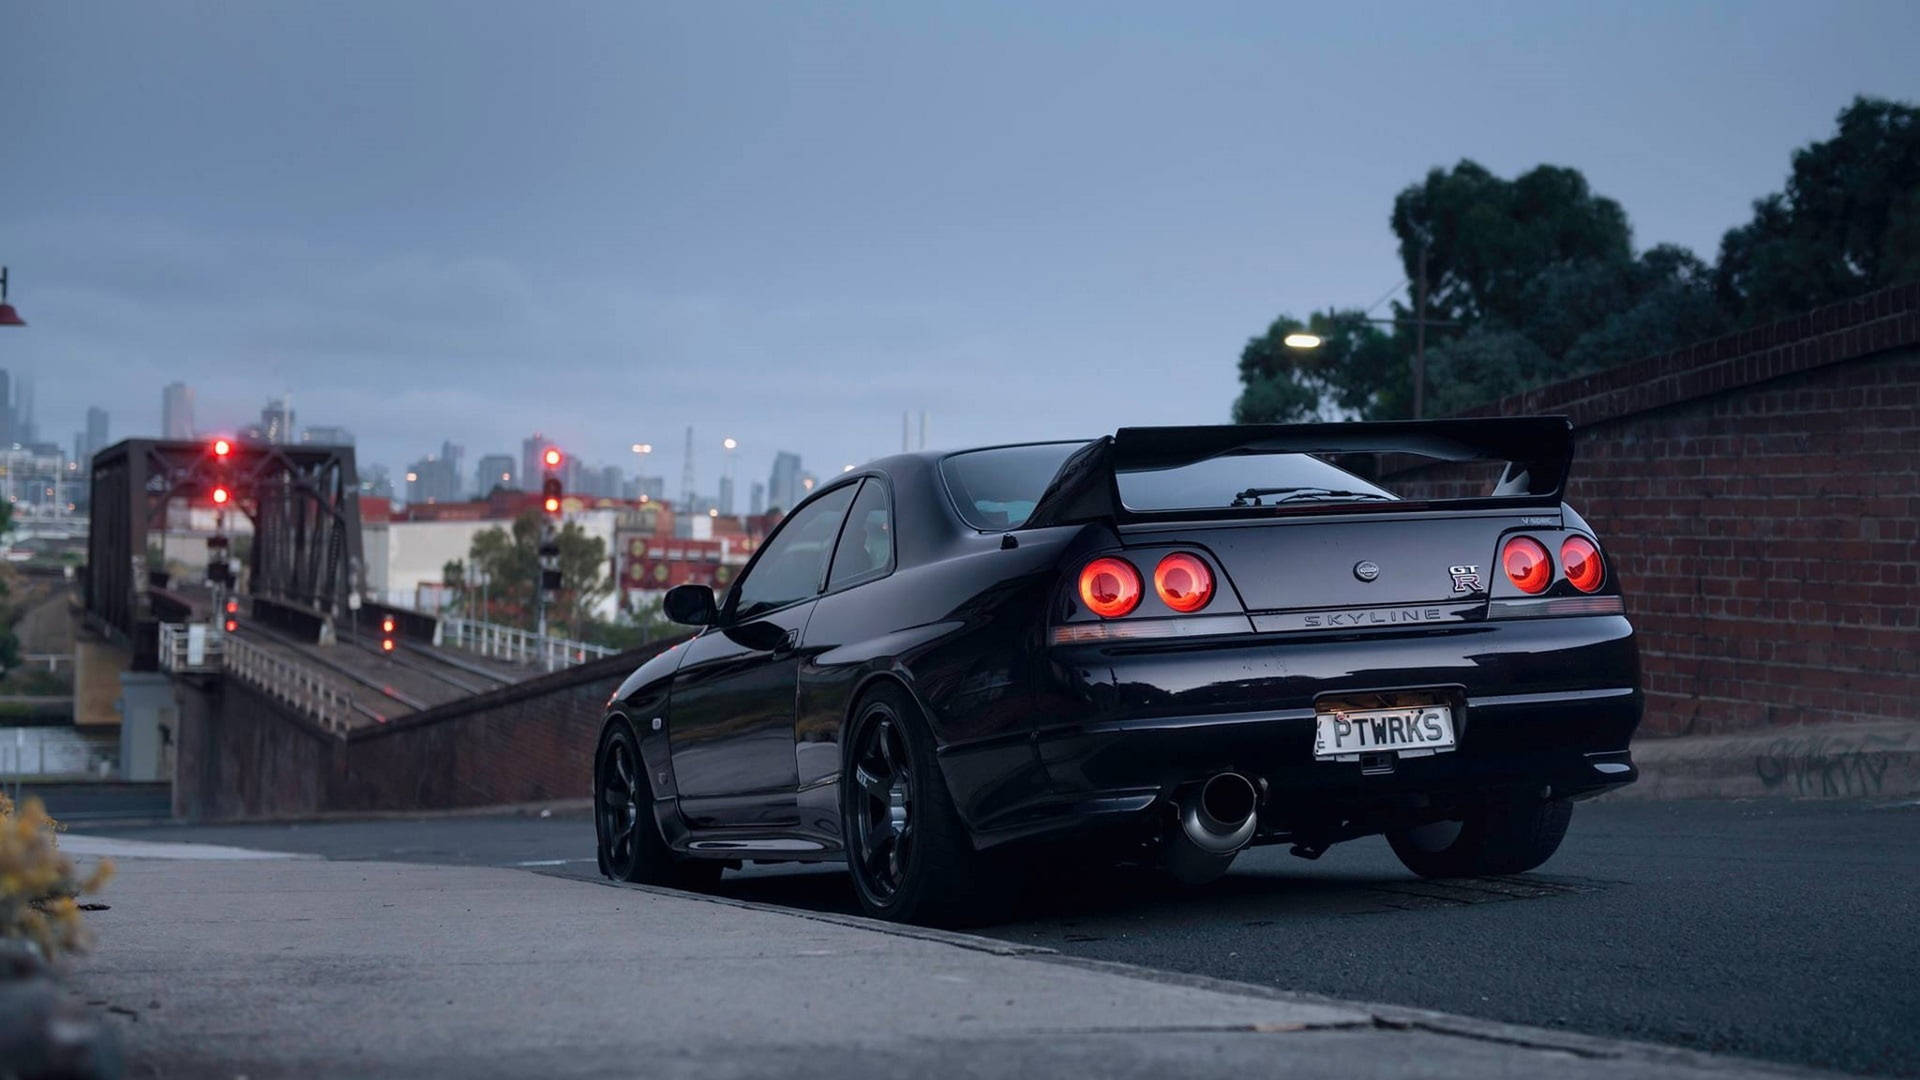 Nissan Skyline Gtr R33 In Its Magnificent Glory Background